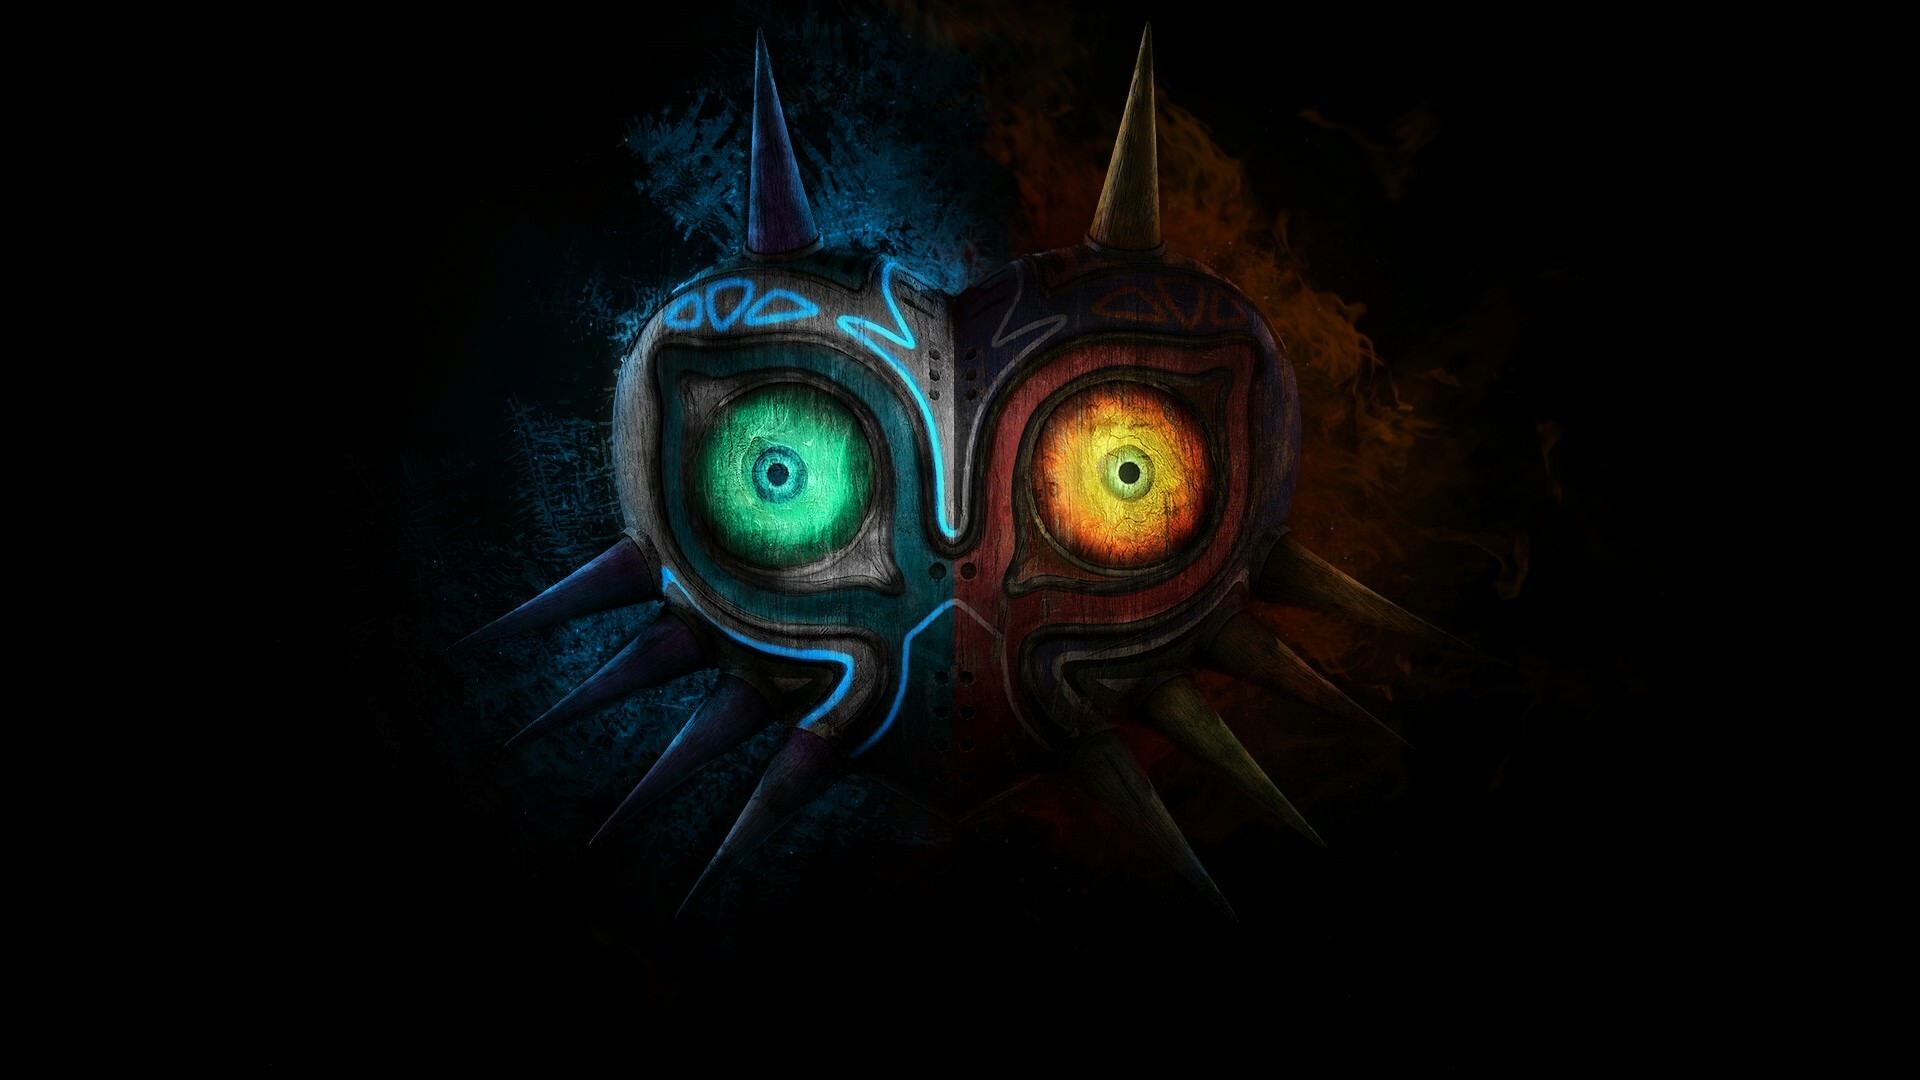 The Legend of Zelda: Majora's Mask, The sixth game in the series. 1920x1080 Full HD Wallpaper.